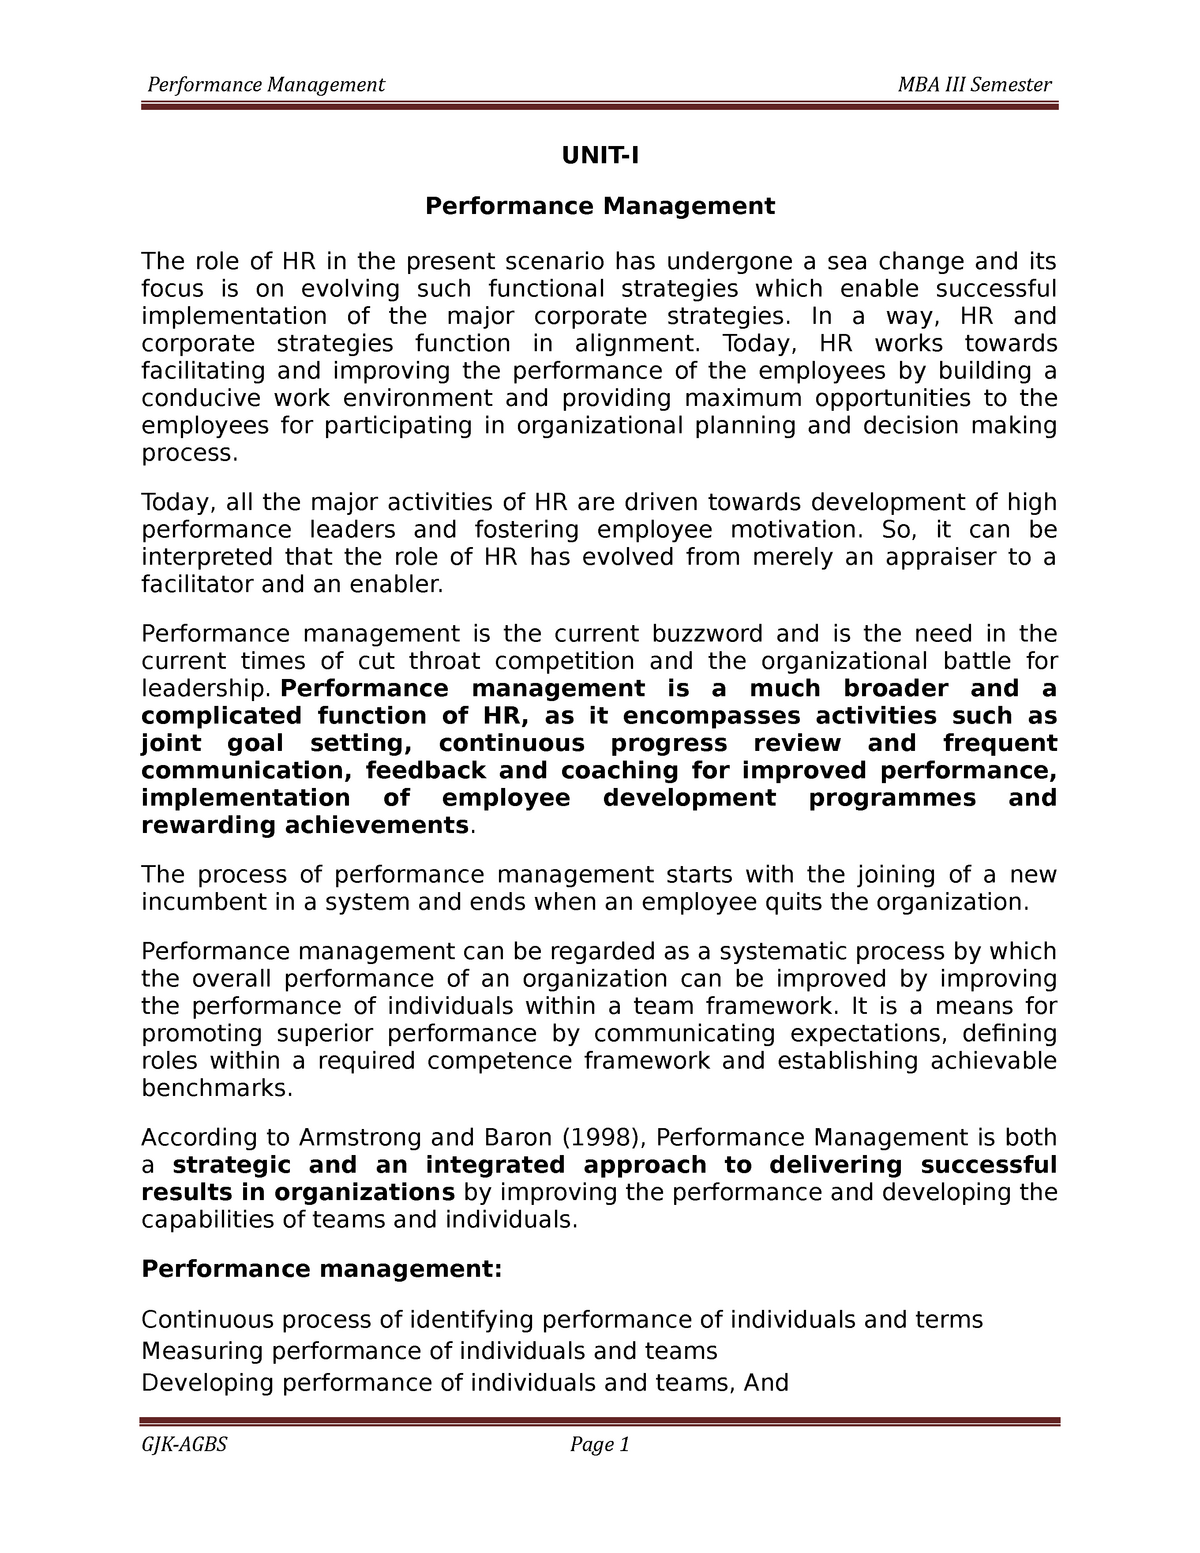 performance management master thesis